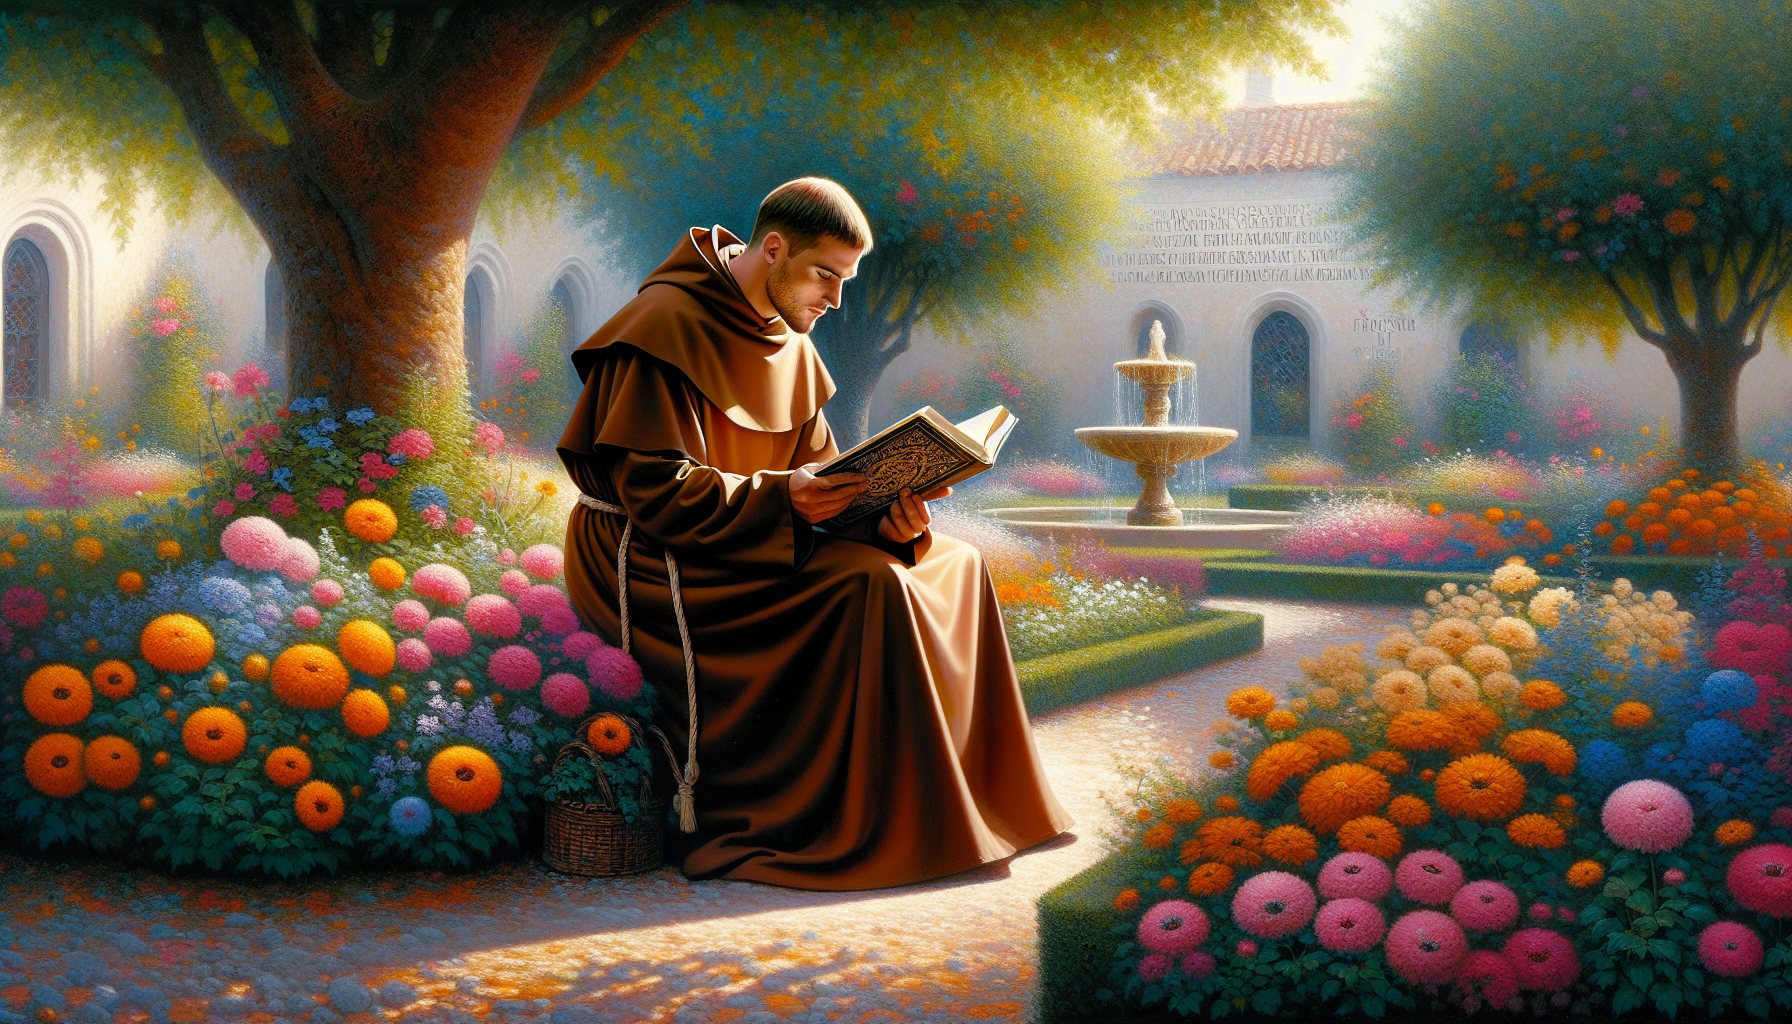 Portrait of a Franciscan monk in traditional brown robe, reading a historic scripture in a peaceful, sunlit monastery garden, surrounded by blooming flowers and a serene fountain.